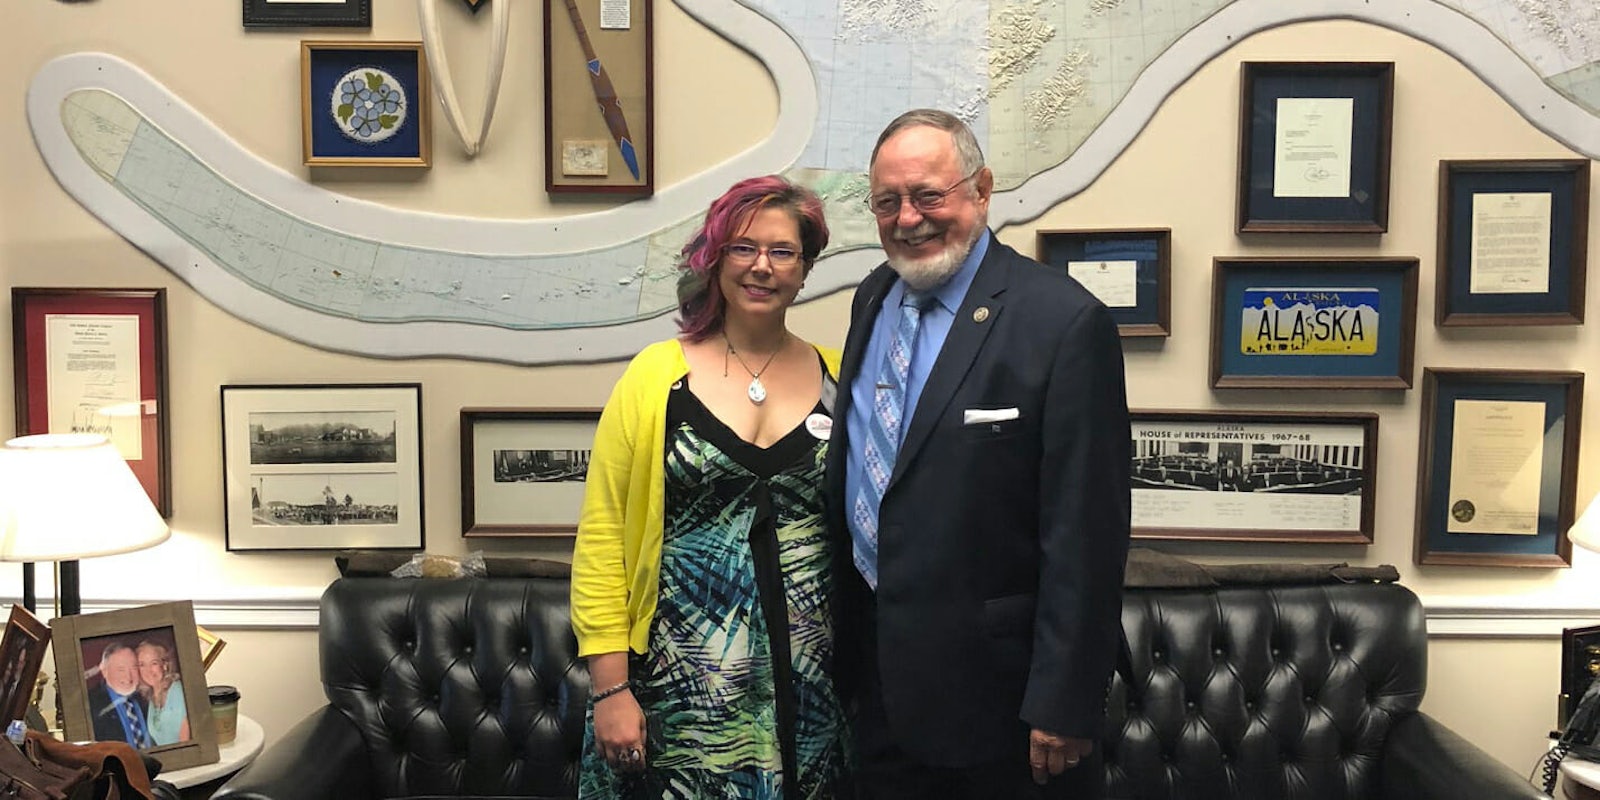 Jennie Stewart, a consituient of Rep. Don Young (R-Alaska), says he gave her a 'verbal commitment' to sign the net neutrality CRA, before going dark.